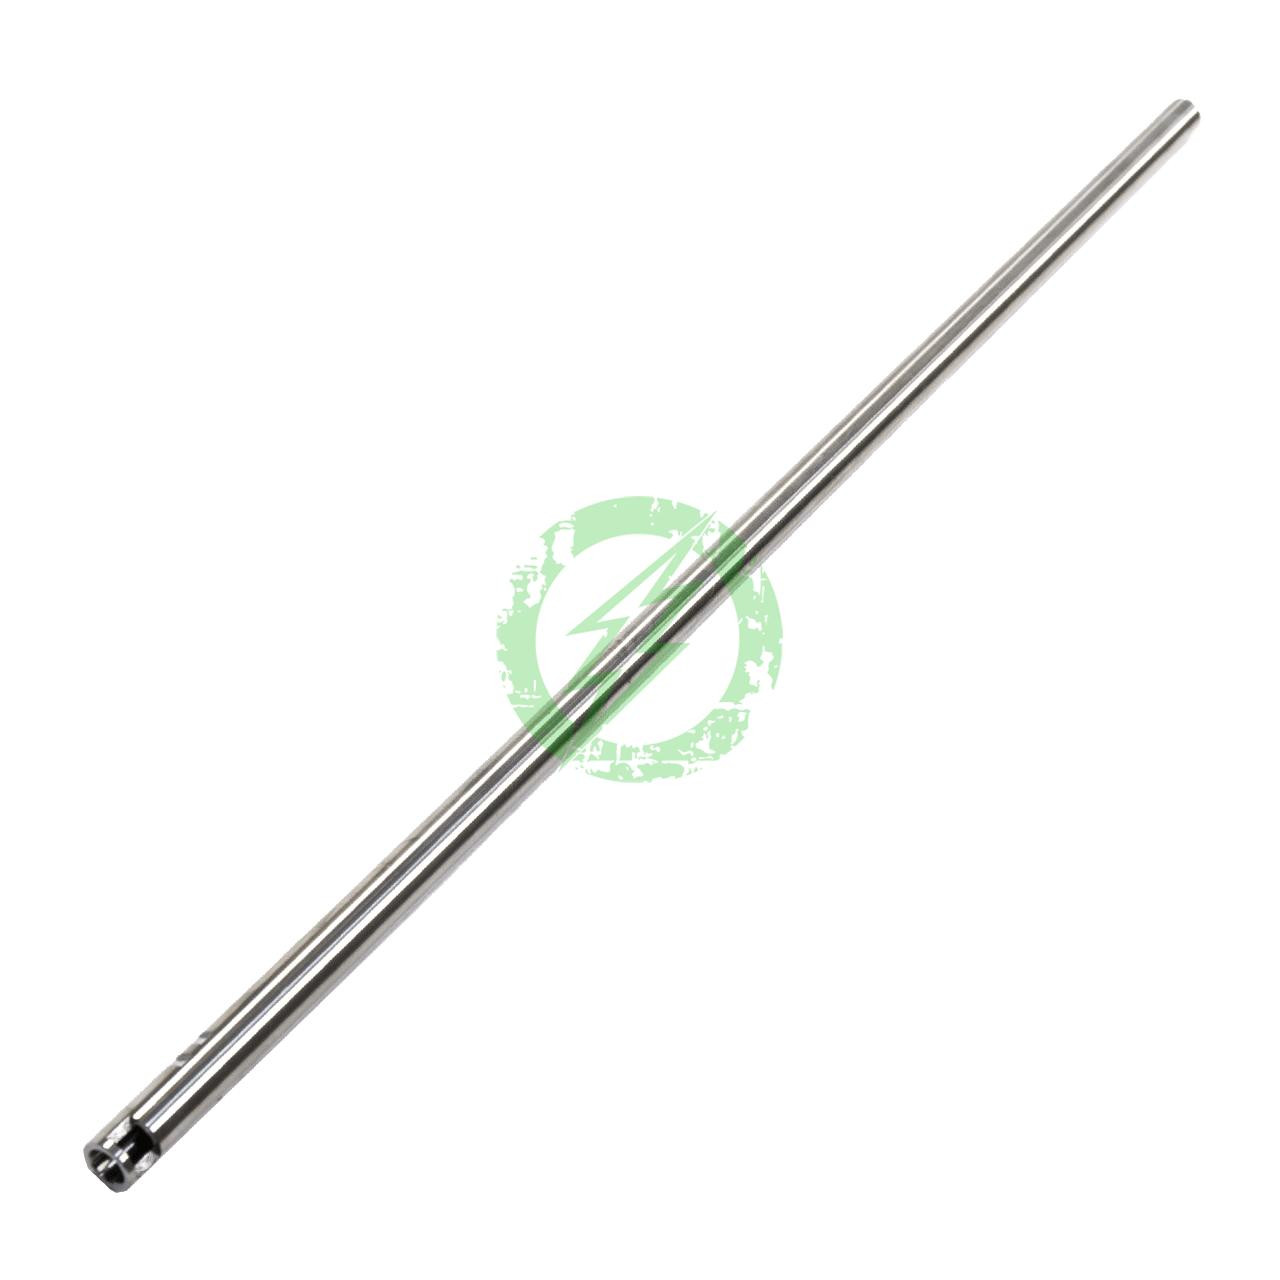  Lambda "One" 6.01mm Stainless Barrel | 128mm to 509mm 